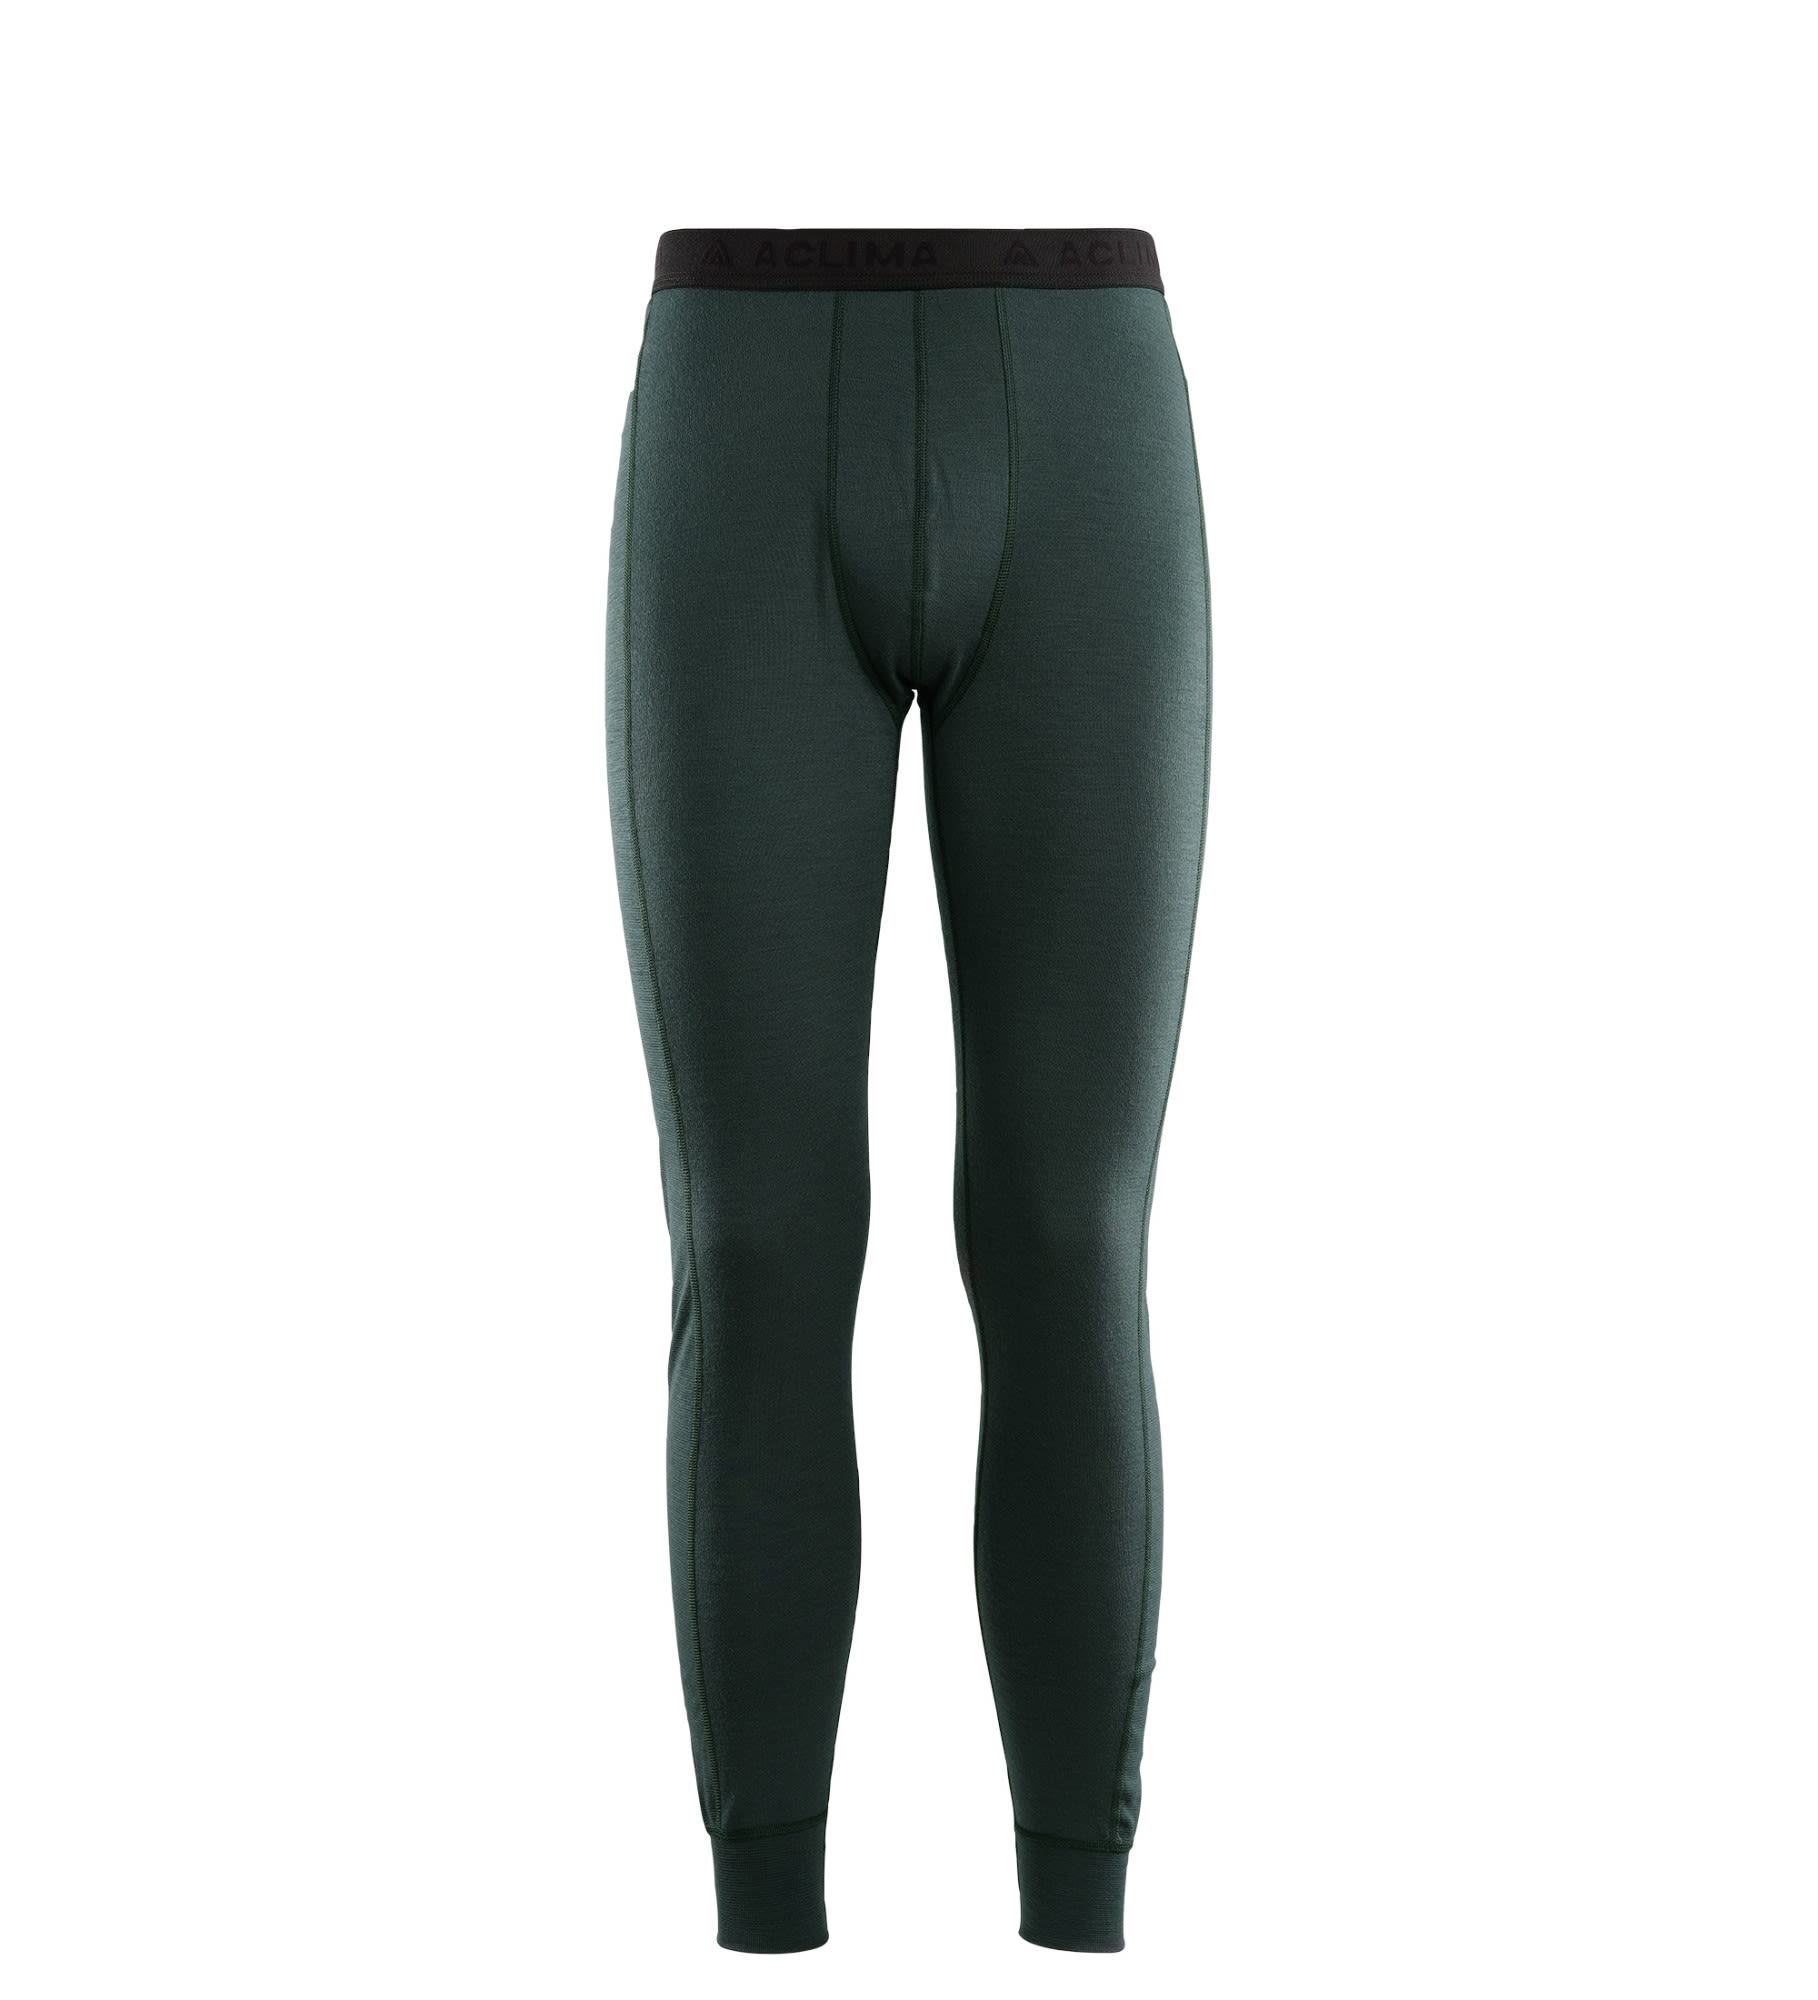 Aclima Warmwool Long Pants Grn- Male Merino Leggings und Tights- Grsse S - Farbe Green Gables